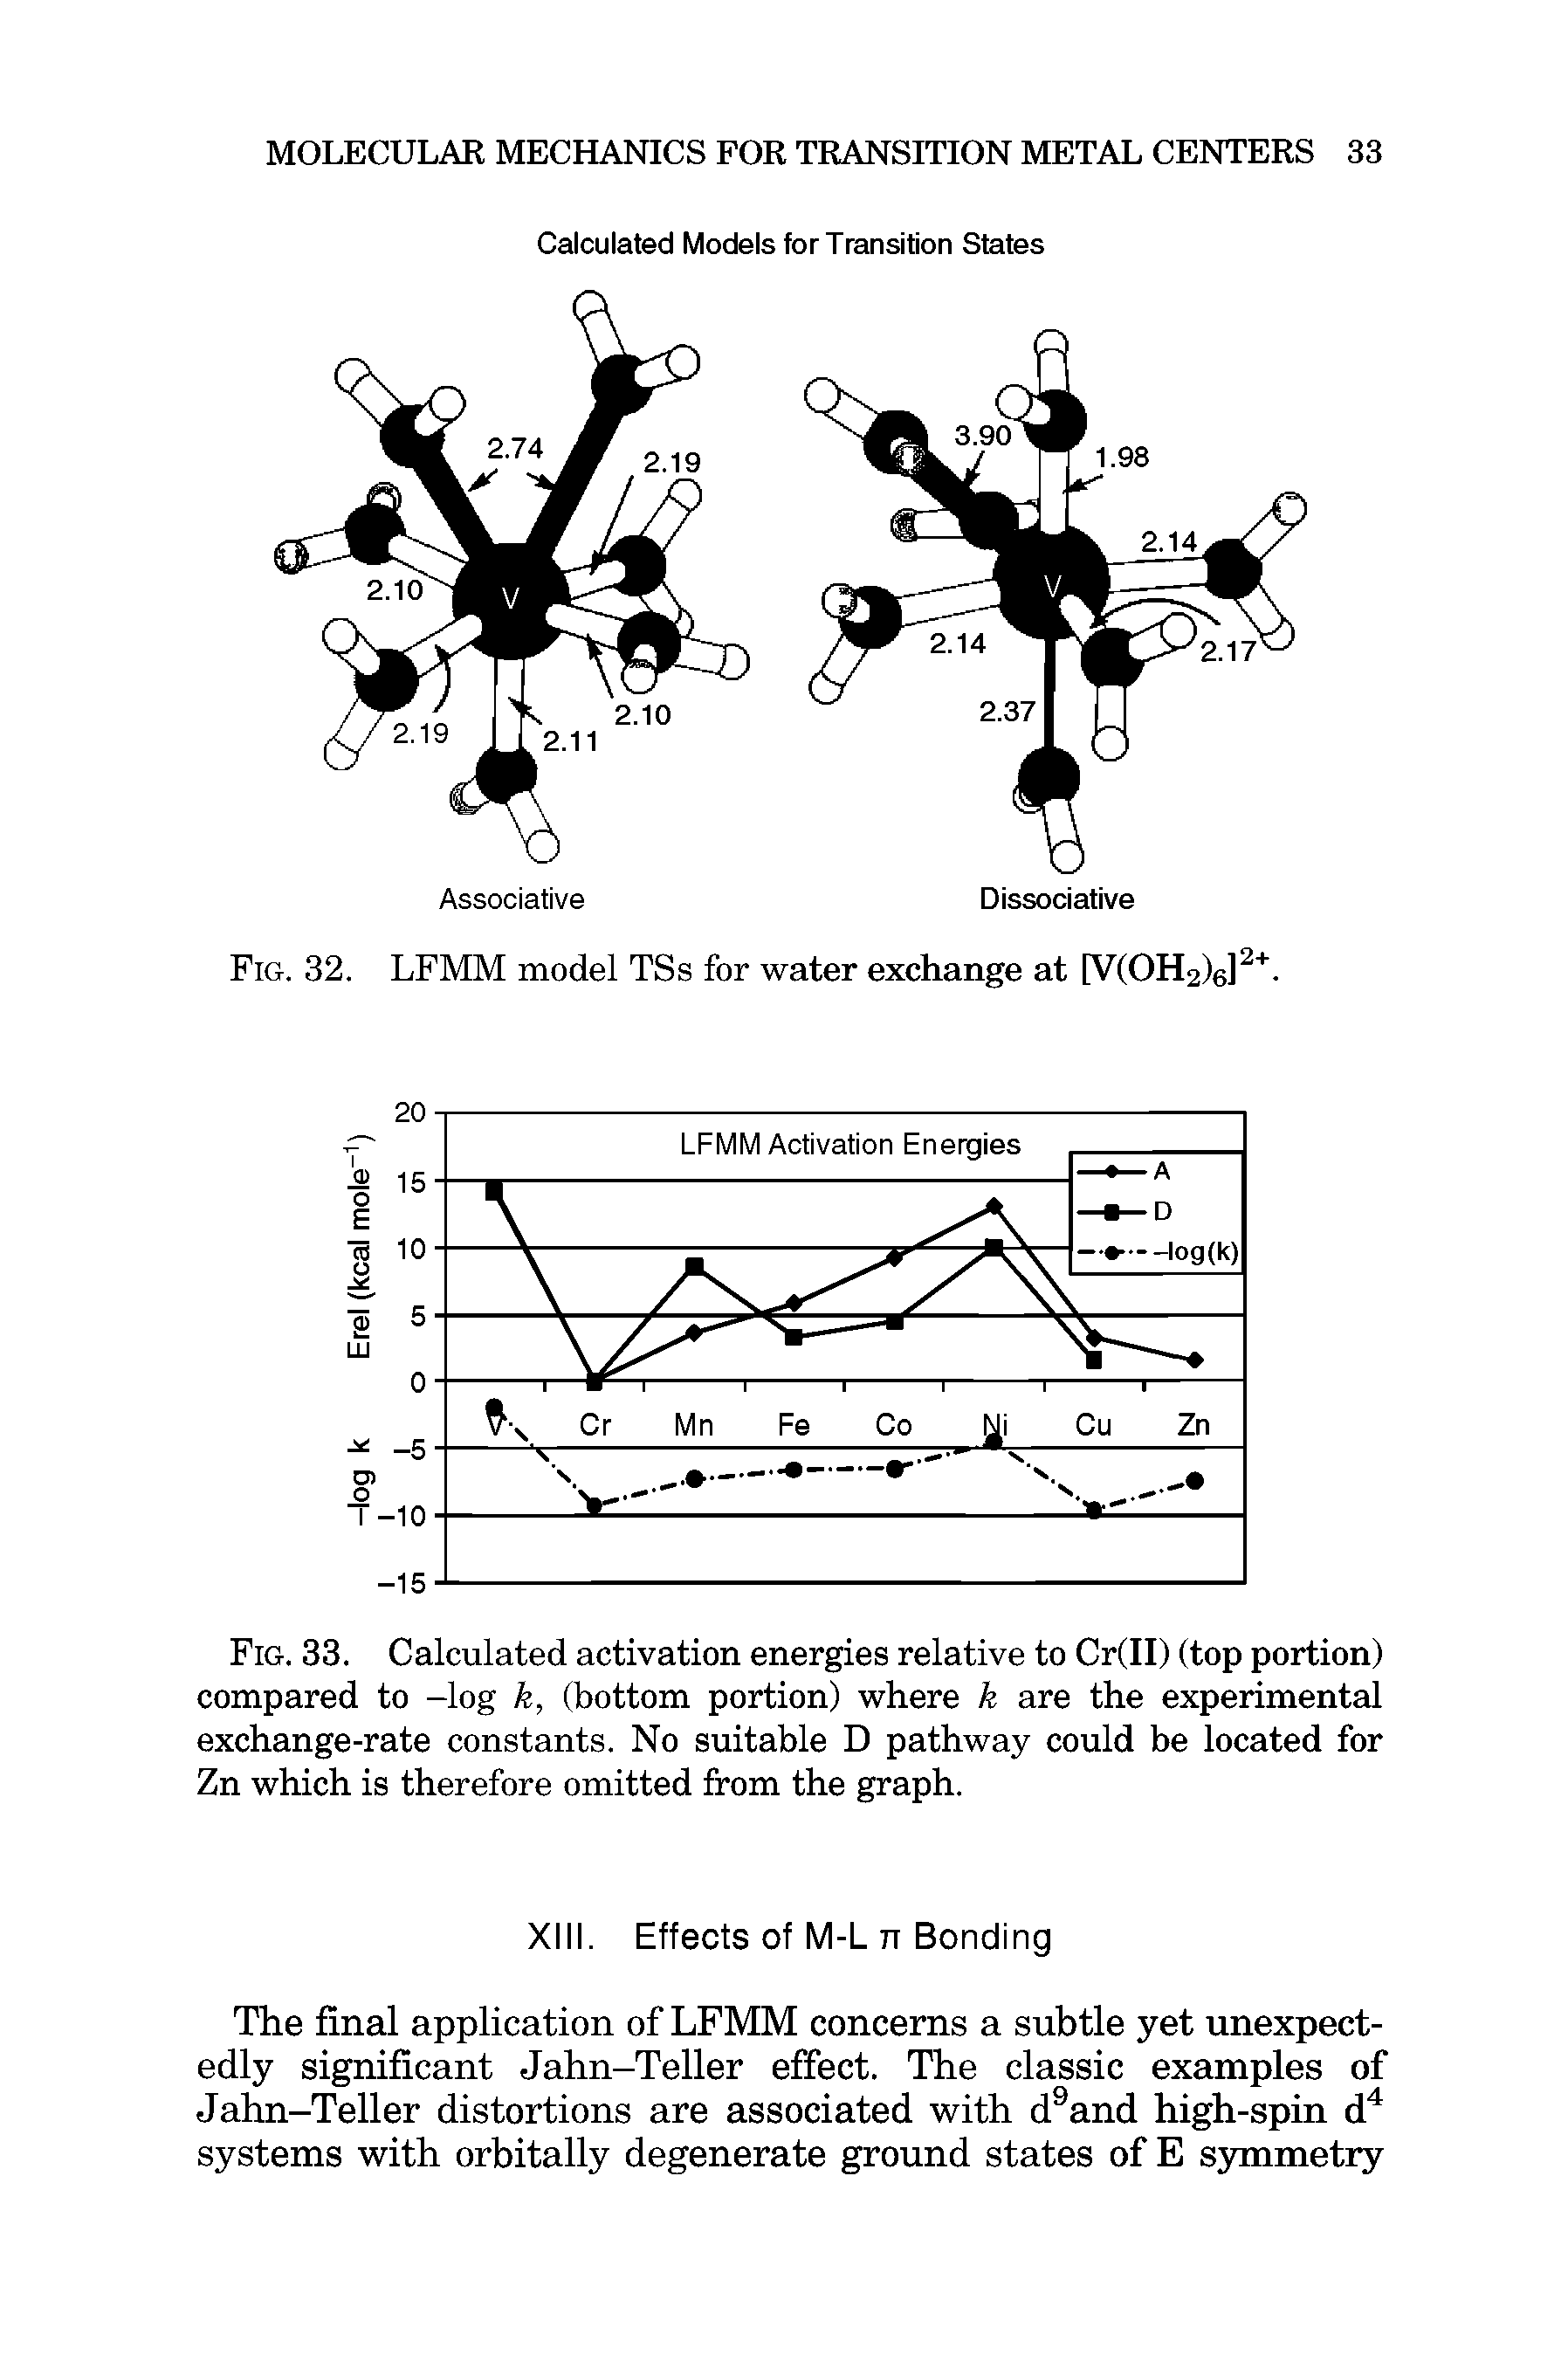 Fig. 33. Calculated activation energies relative to Cr(II) (top portion) compared to -log k, (bottom portion) where k are the experimental exchange-rate constants. No suitable D pathway could be located for Zn which is therefore omitted from the graph.